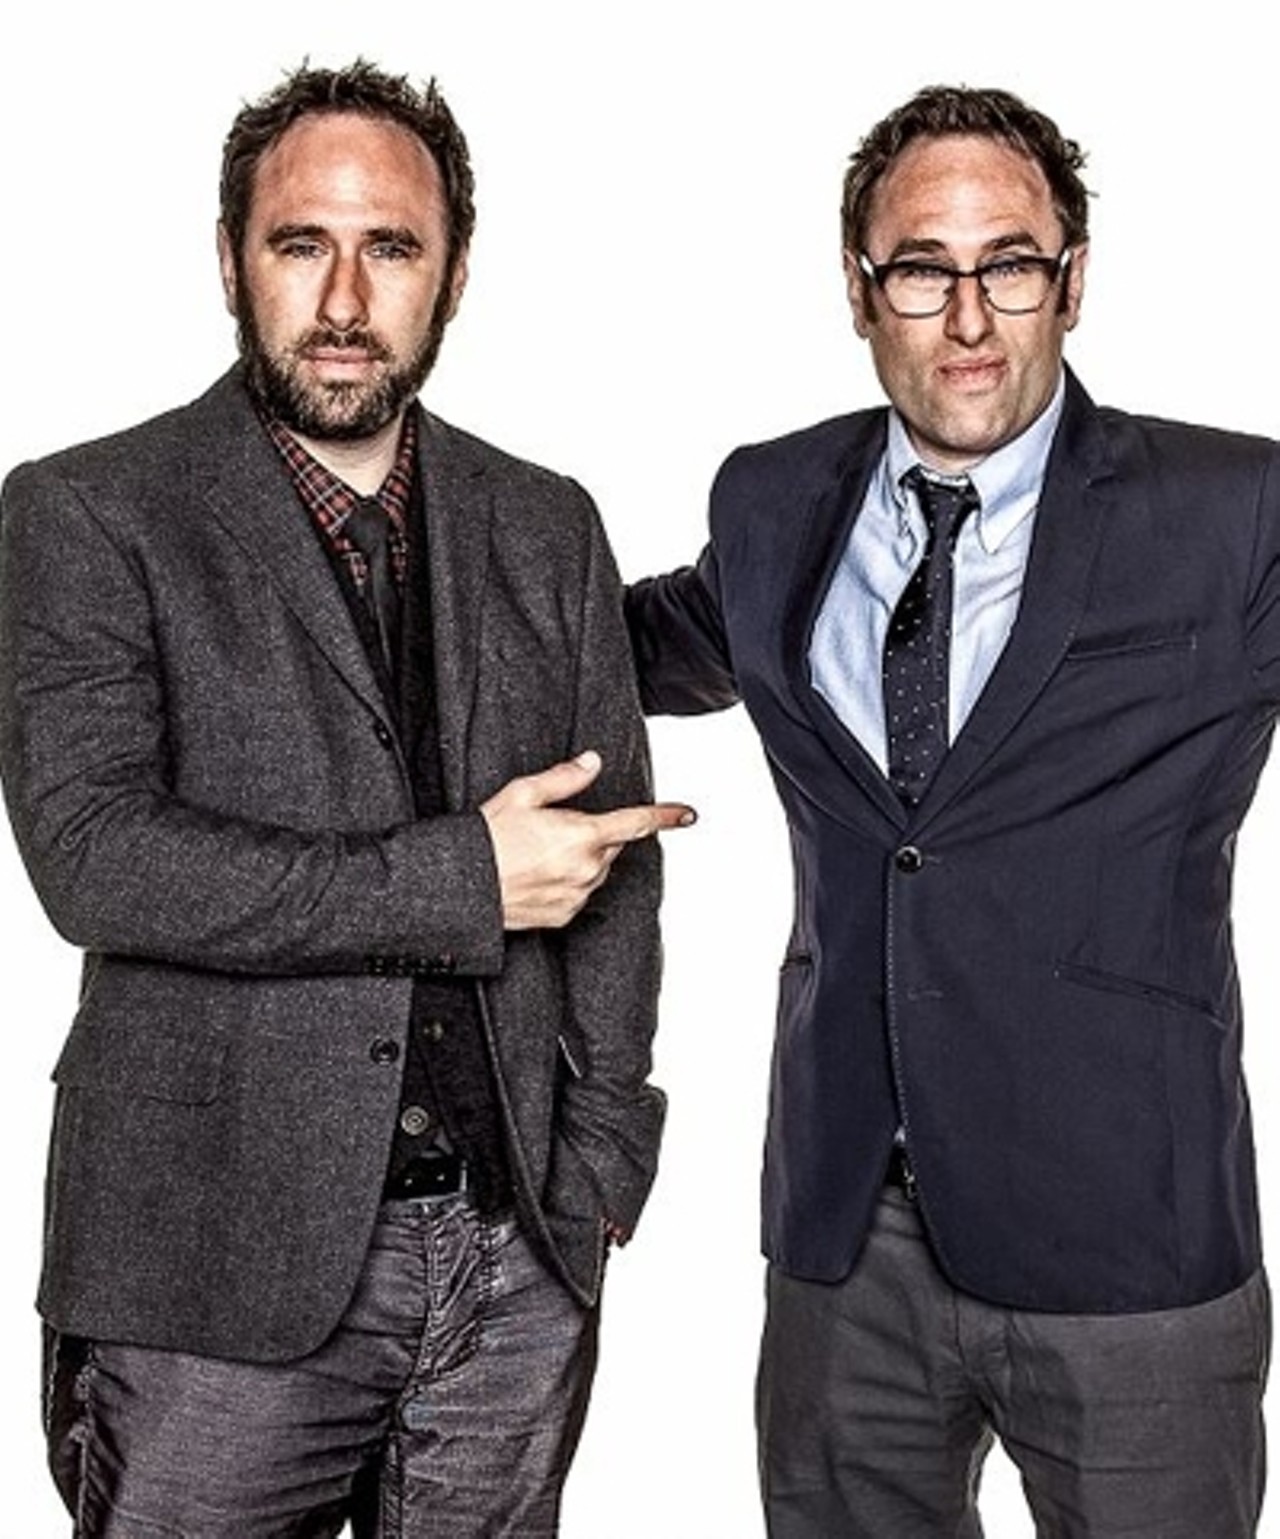 The Sklar Brothers Comedy Show at 2720